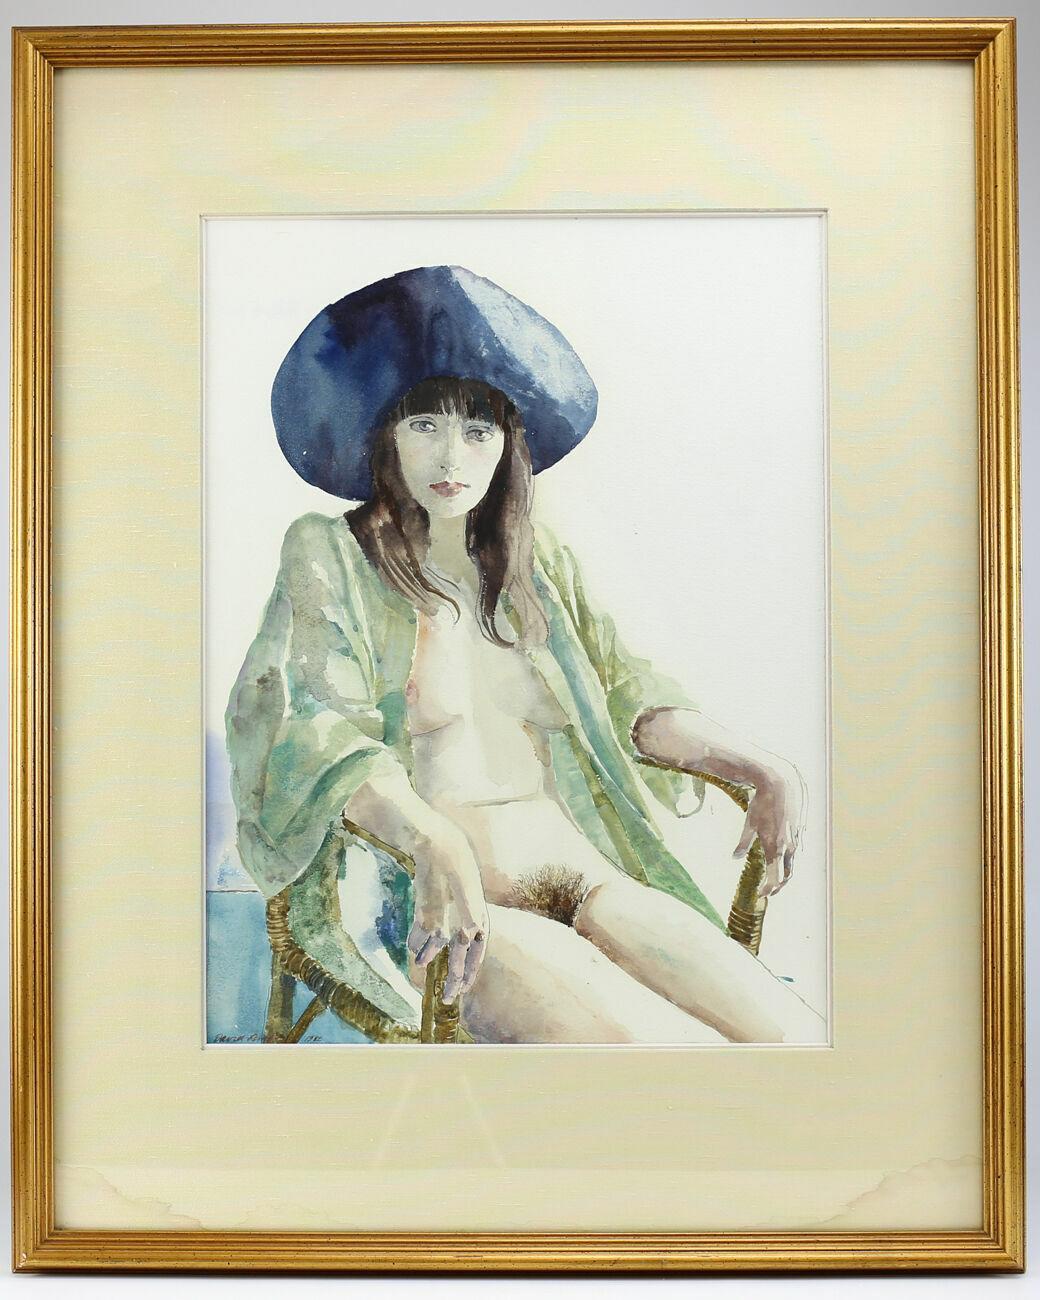 David Remfry watercolor of a seated nude girl, Signed

Remfry, David (American/British, 1942) Watercolor of a seated nude girl with blue hat. Signed and Dated David Remfry 1982 (lower left). 

Additional Information:
Painting Surface: Paper